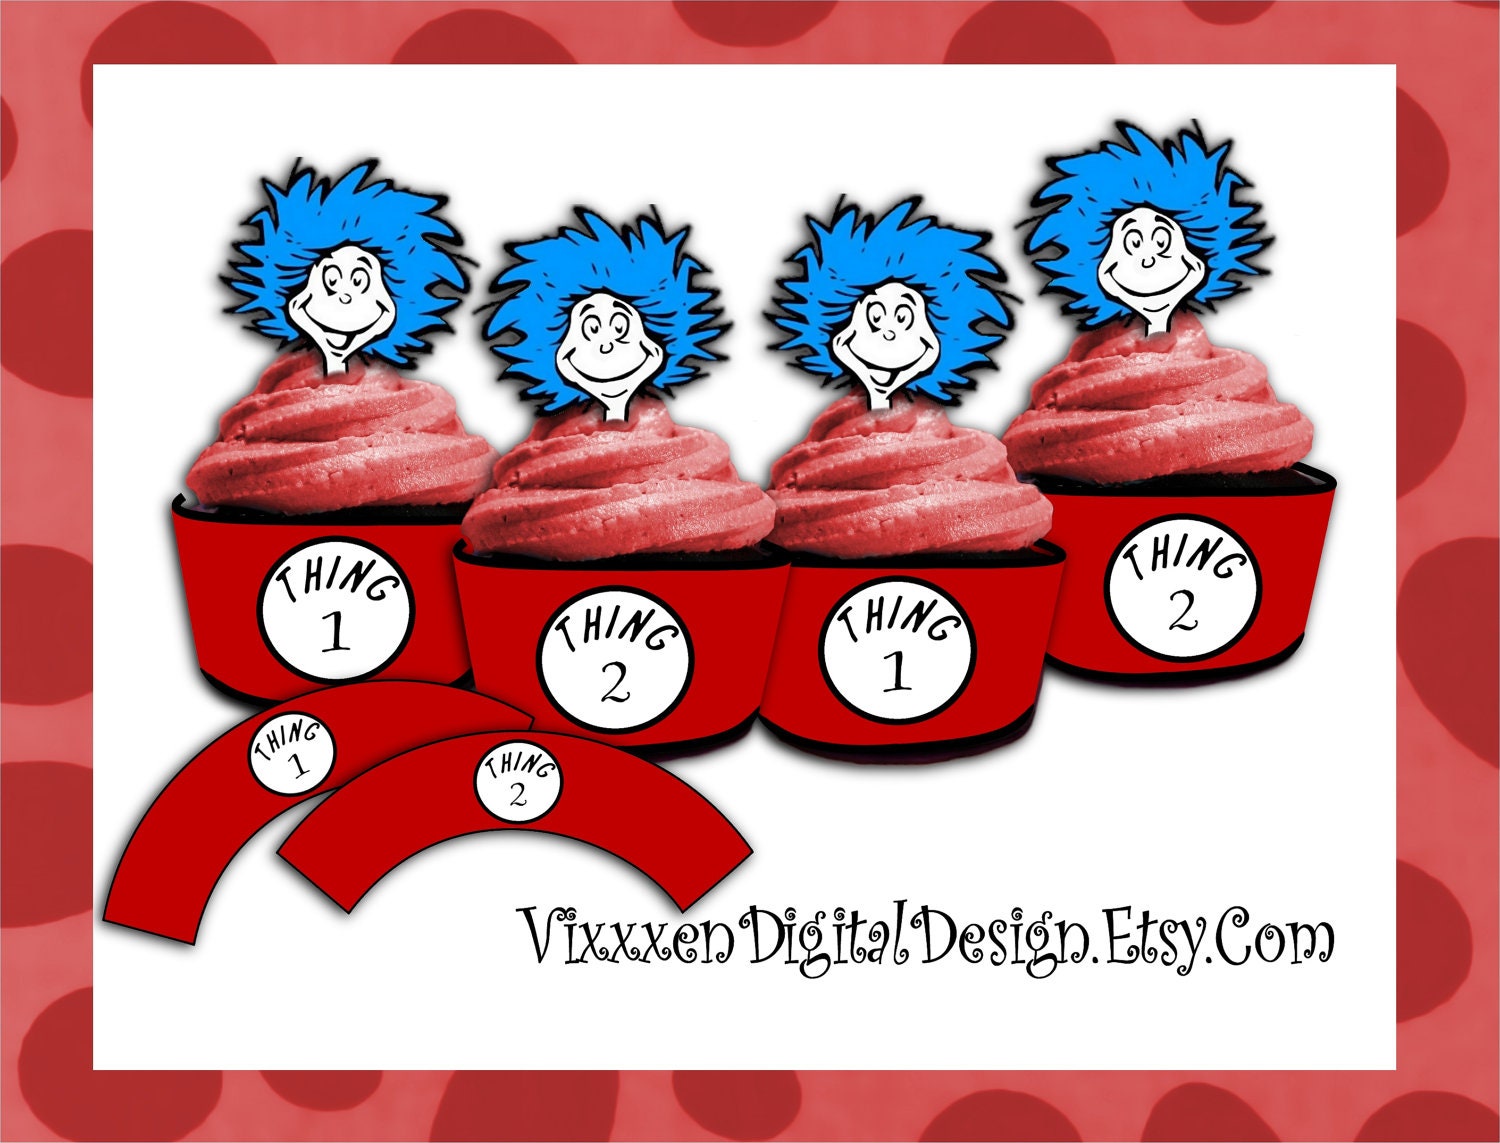 DR. SEUSS Thing 1 Thing 2 cupcake wrappers set 1  other party supplies avaliable - VixxxenDigitalDesign